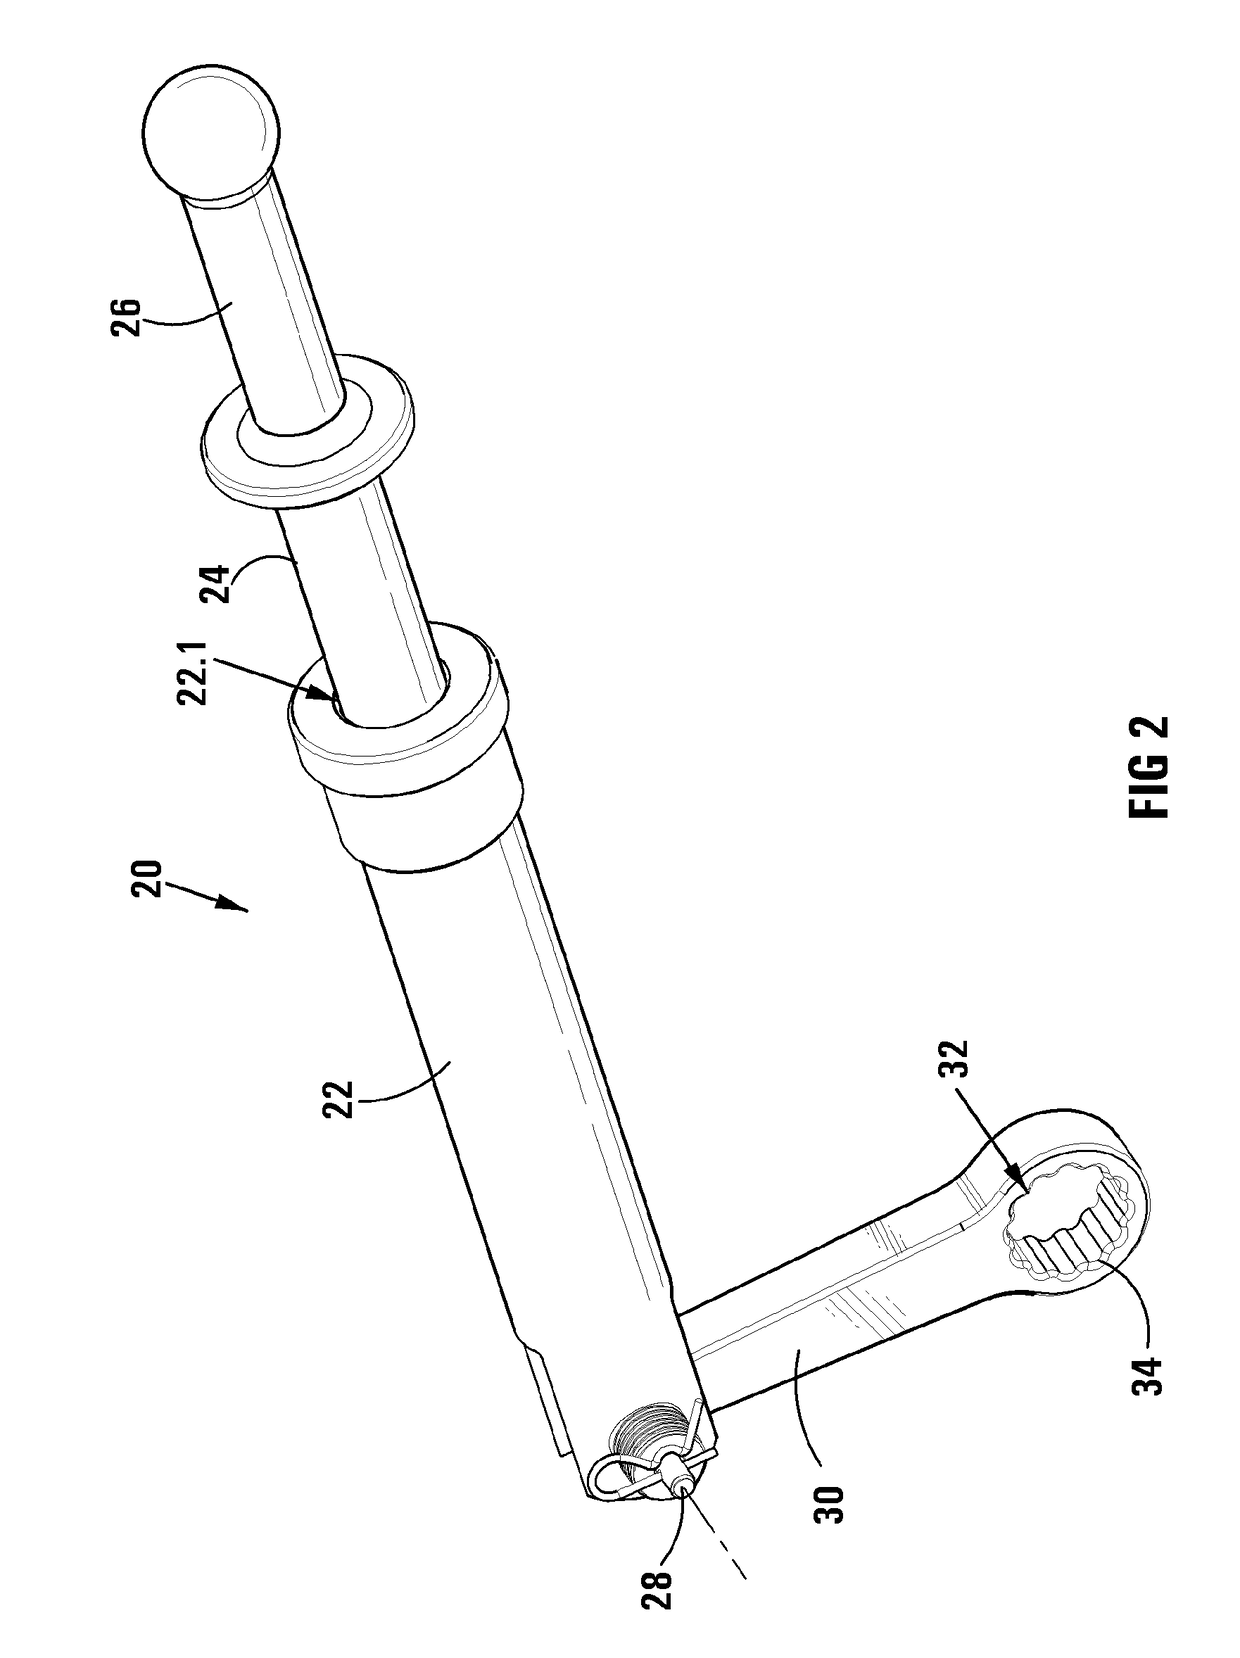 Assembly for loosening or tightening mechanical nuts (esp. wheel nuts)